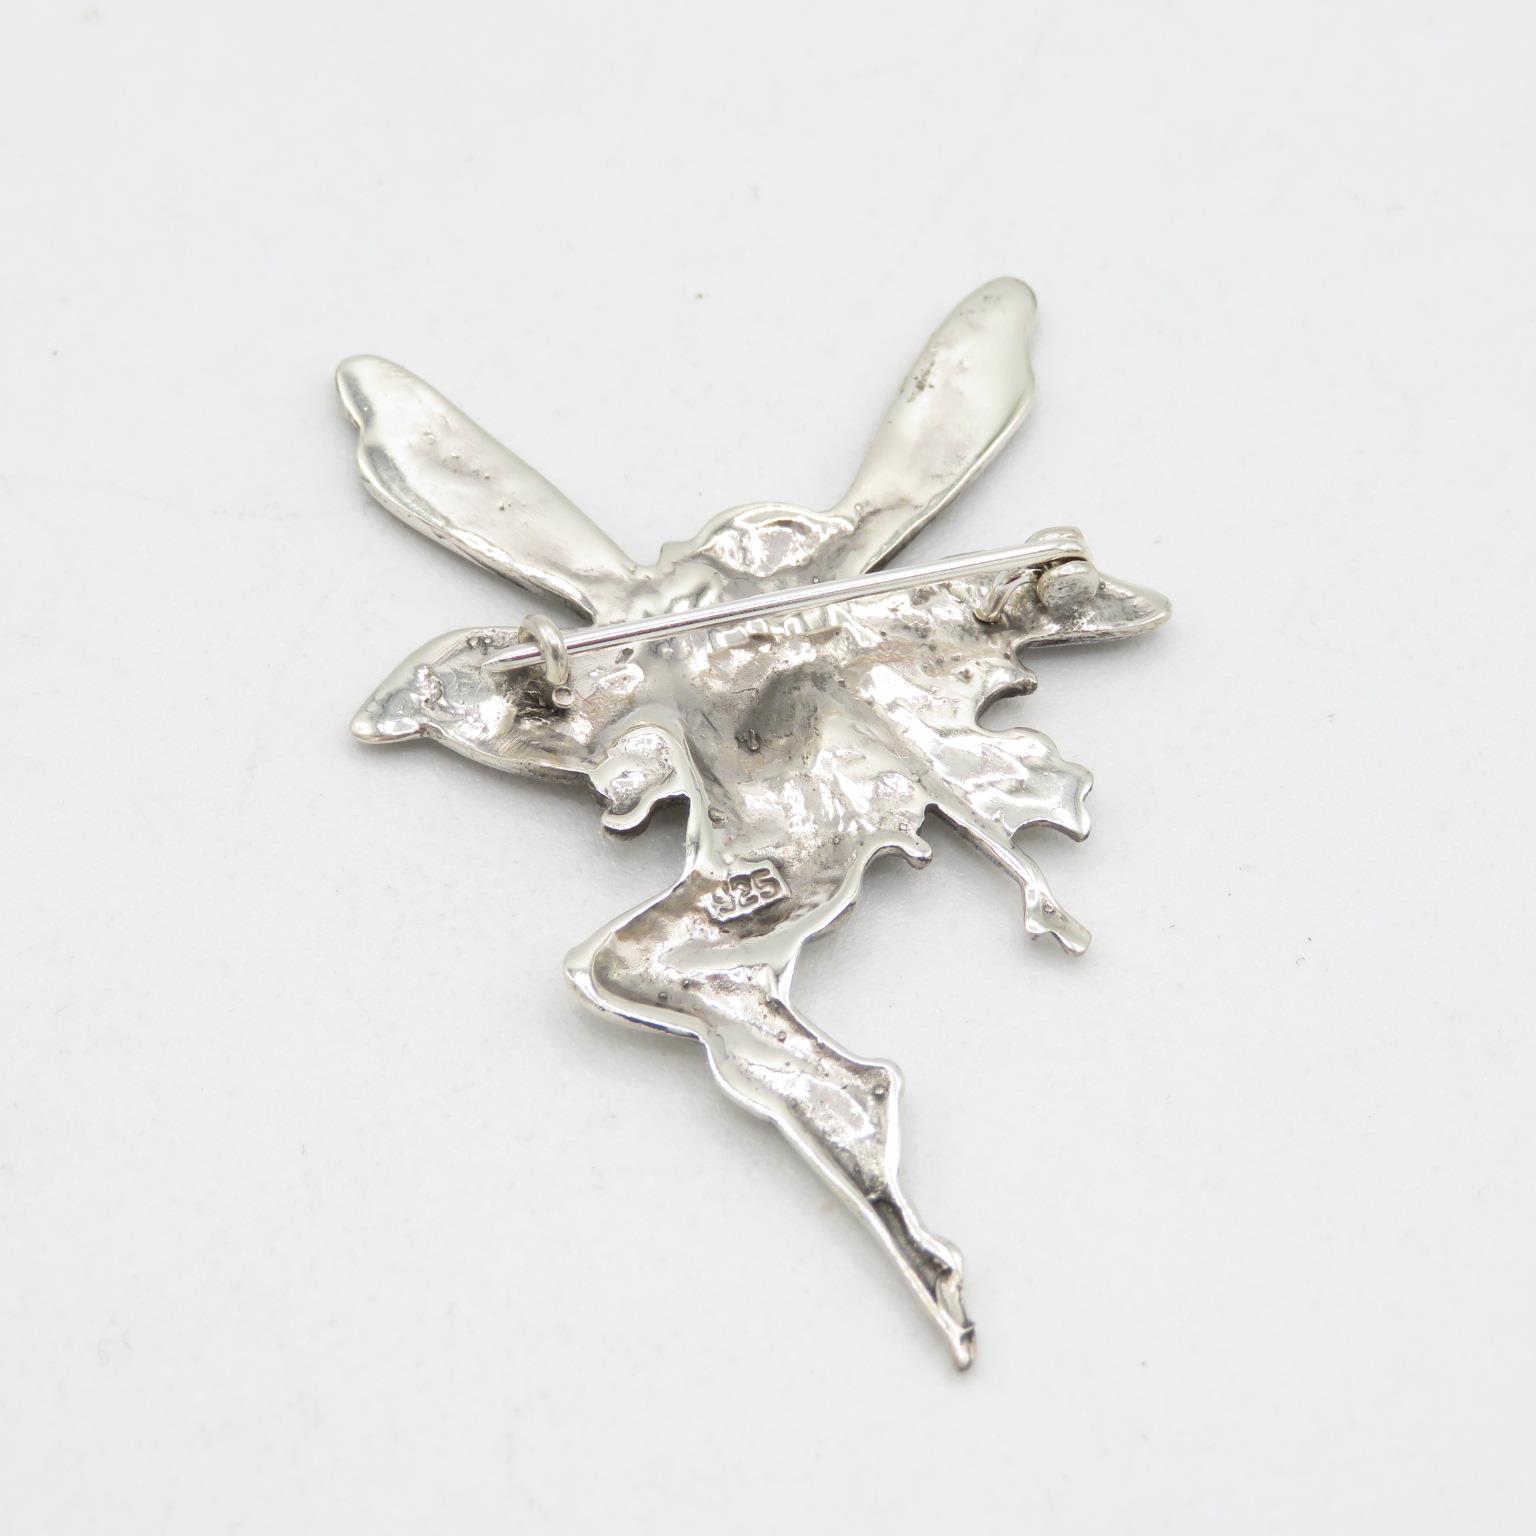 925 Sterling Silver HM Nymph Fairy brooch in perfect condition with tight fitting pin (7.5g) 60mm - Image 3 of 3